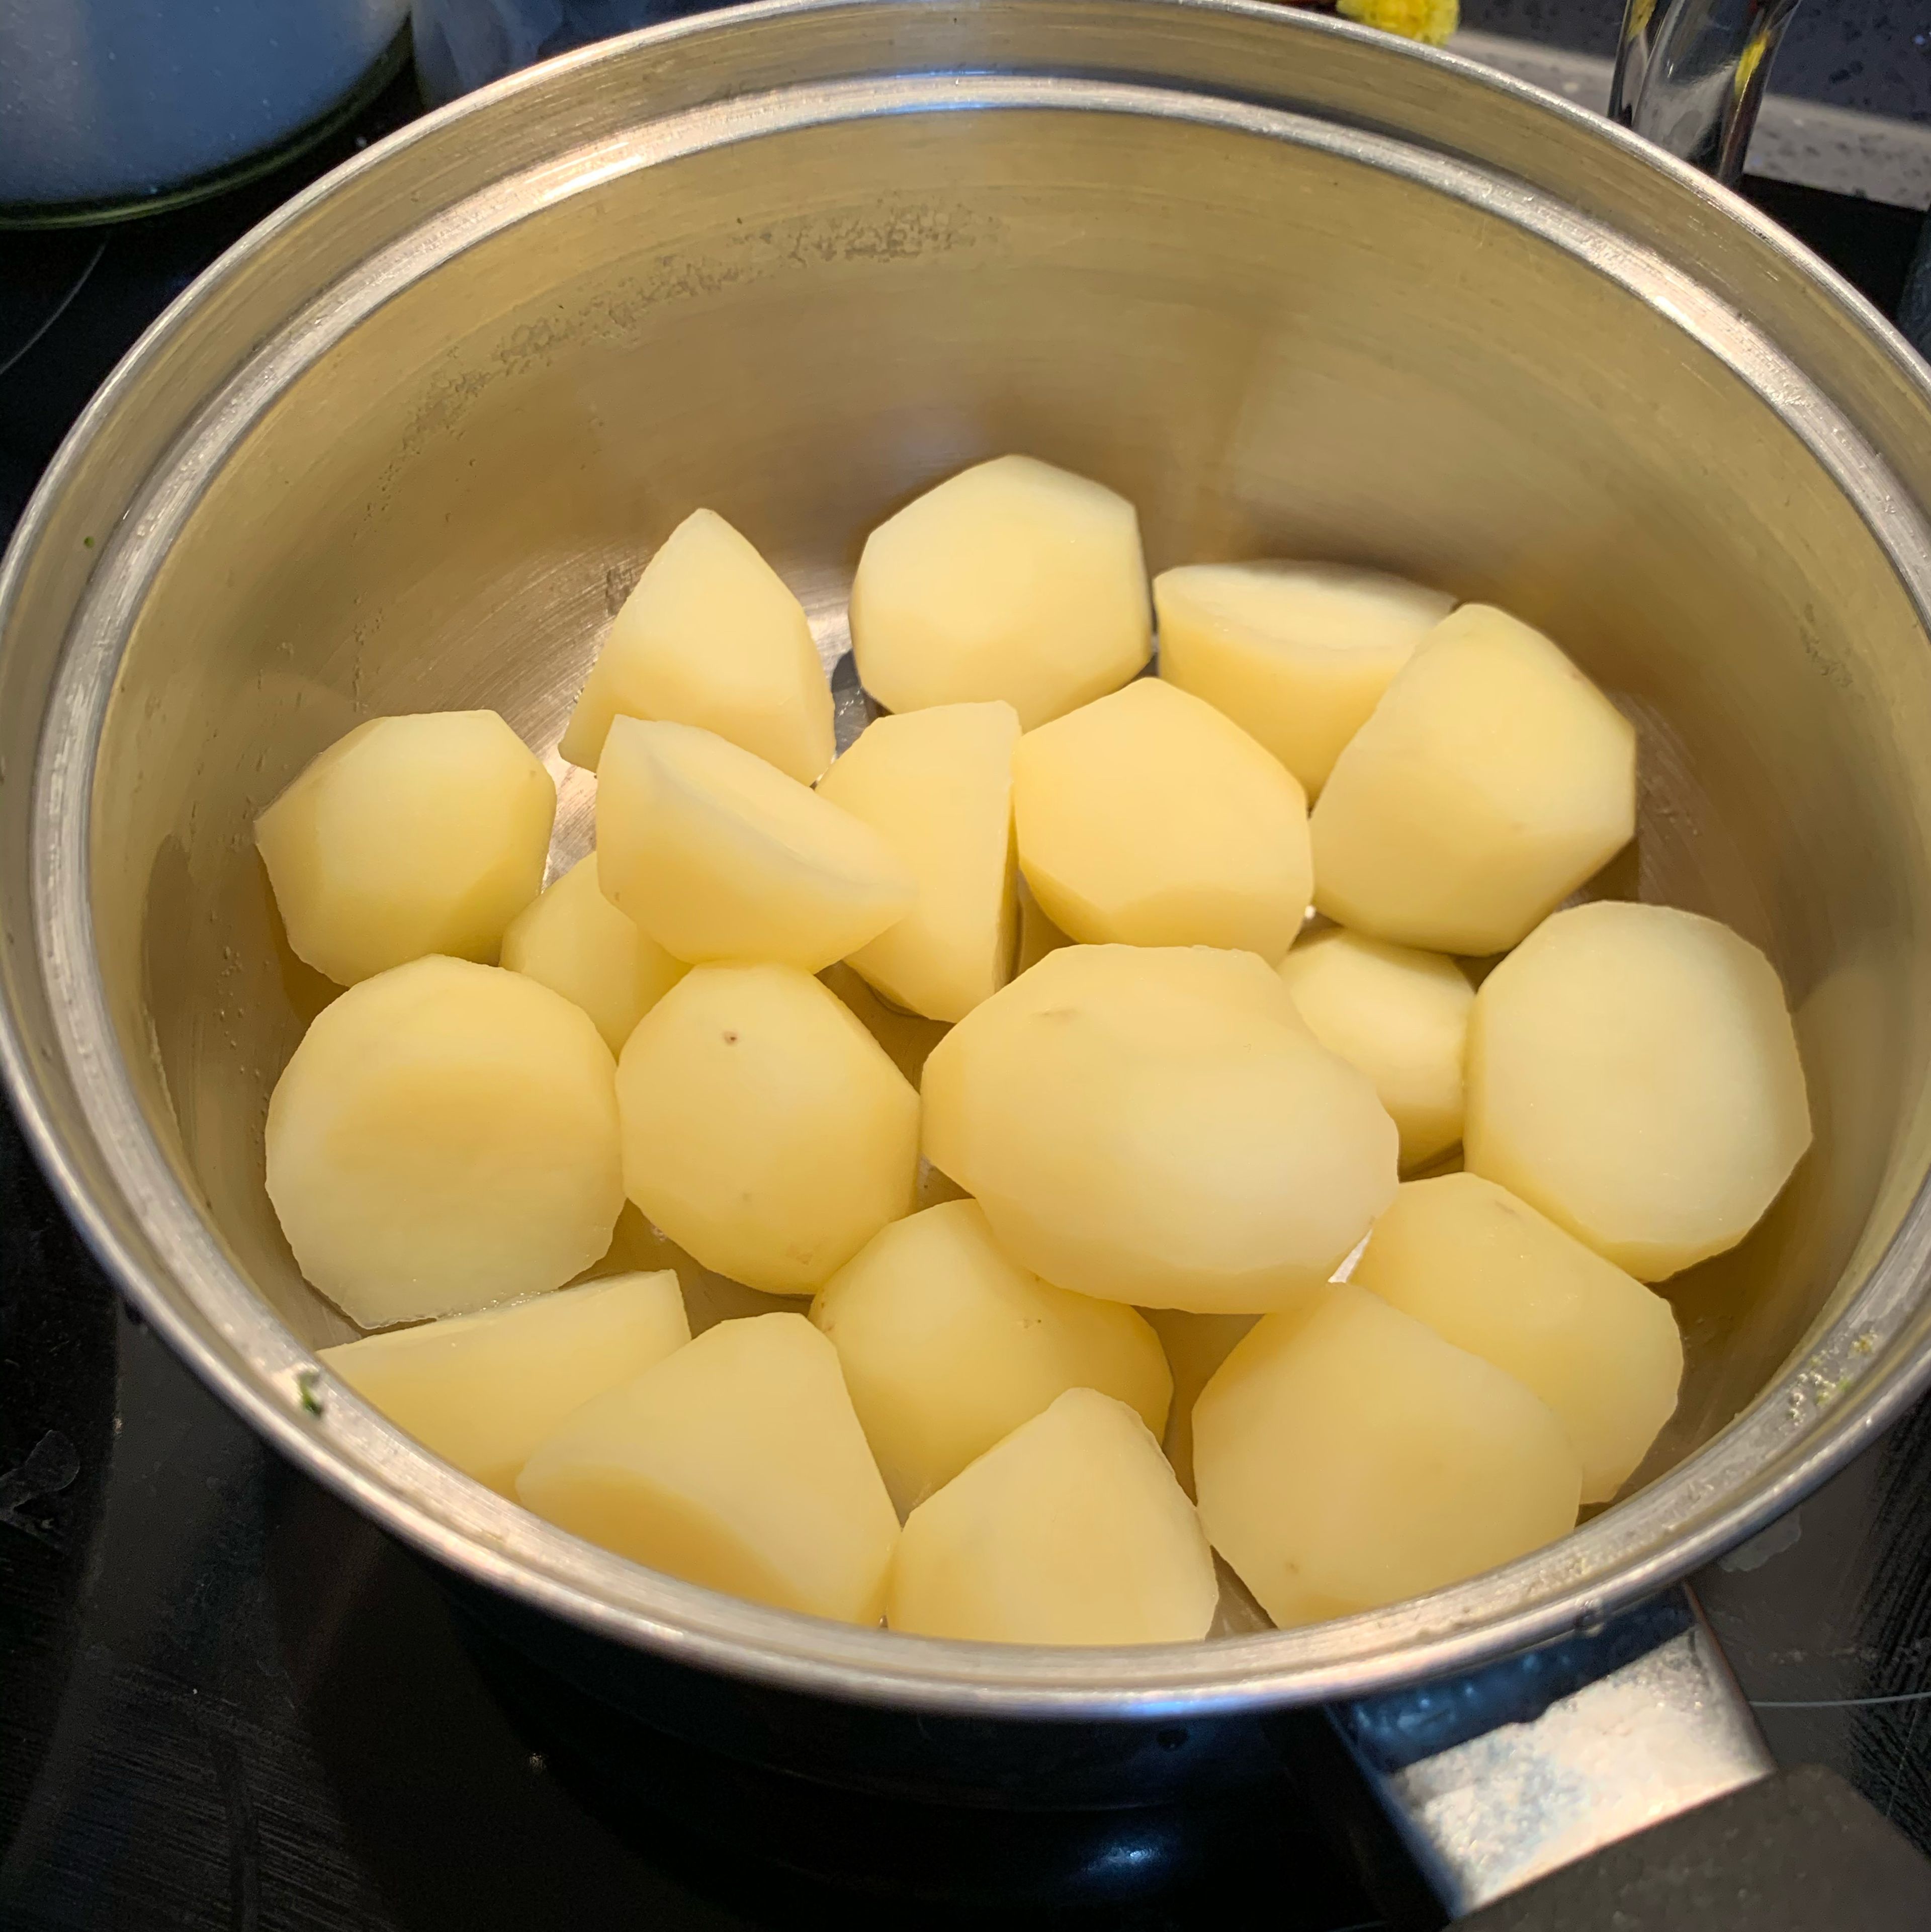 Prepare the baby potatoes by pealing them and cooking in a pan of water for about 10 minutes till nice and soft inside. Once they are done, take the water out and leave them in the warm pan. For a better taste, put some salt and butter at this stage so it melts.